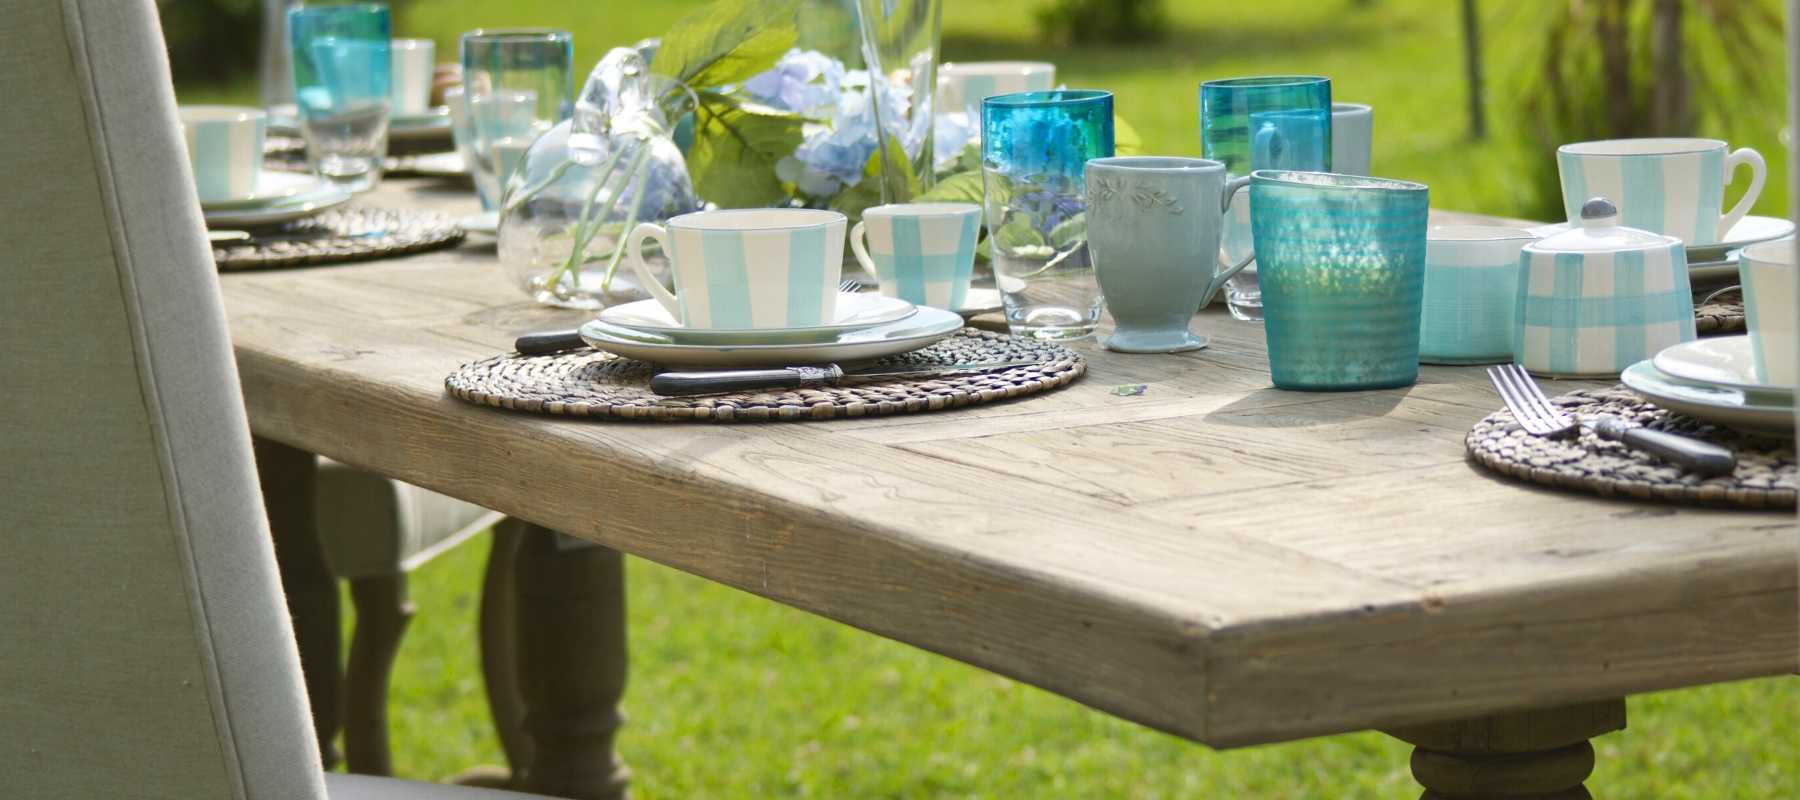 Reclaimed wood dining table with blue glasses